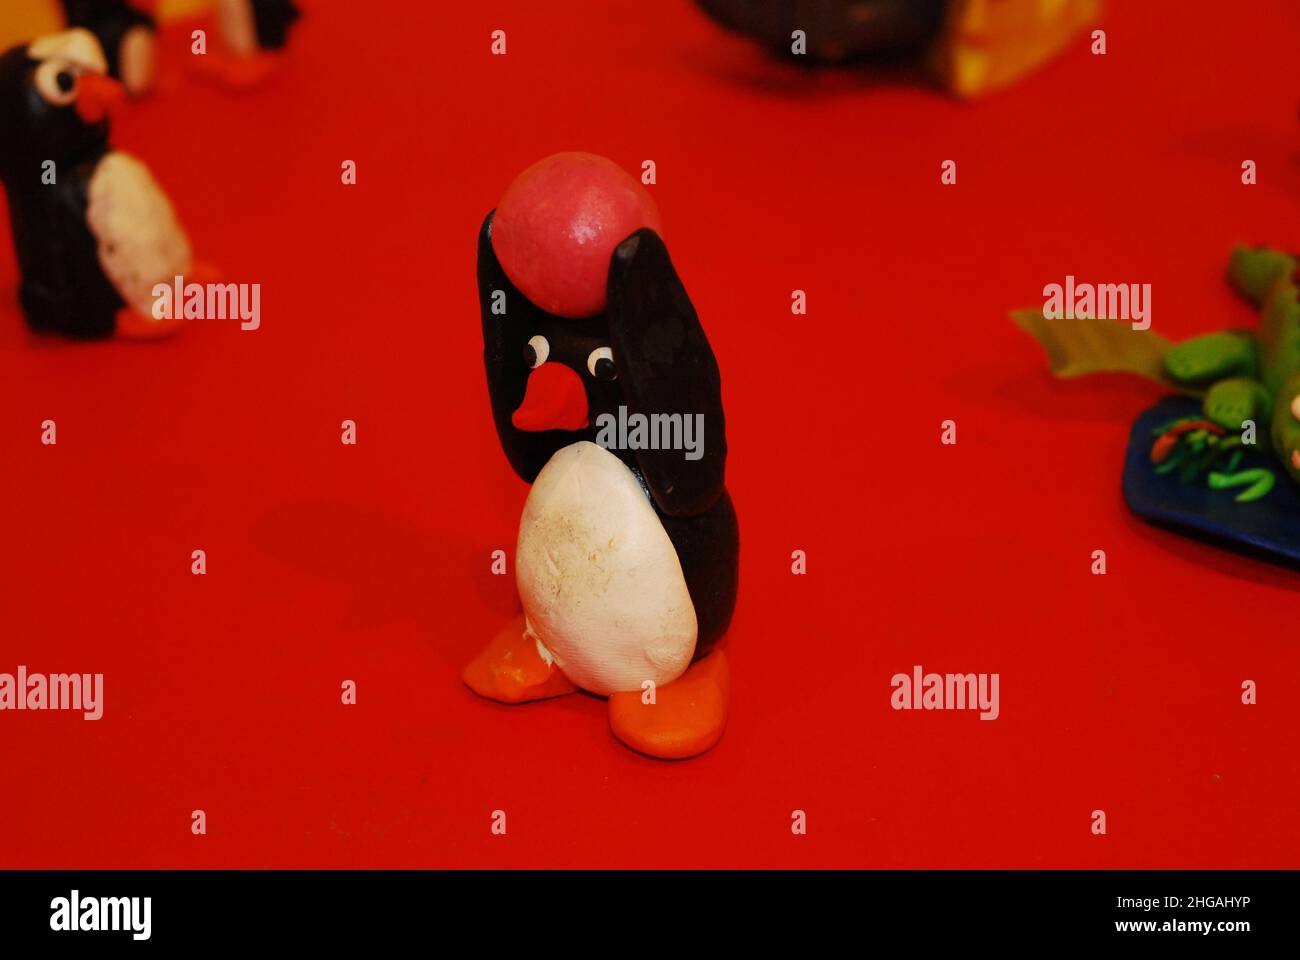 A close-up of a clay penguin, based on the animated TV character, Pingu, made during a children's educational play arts & crafts/model-making workshop Stock Photo